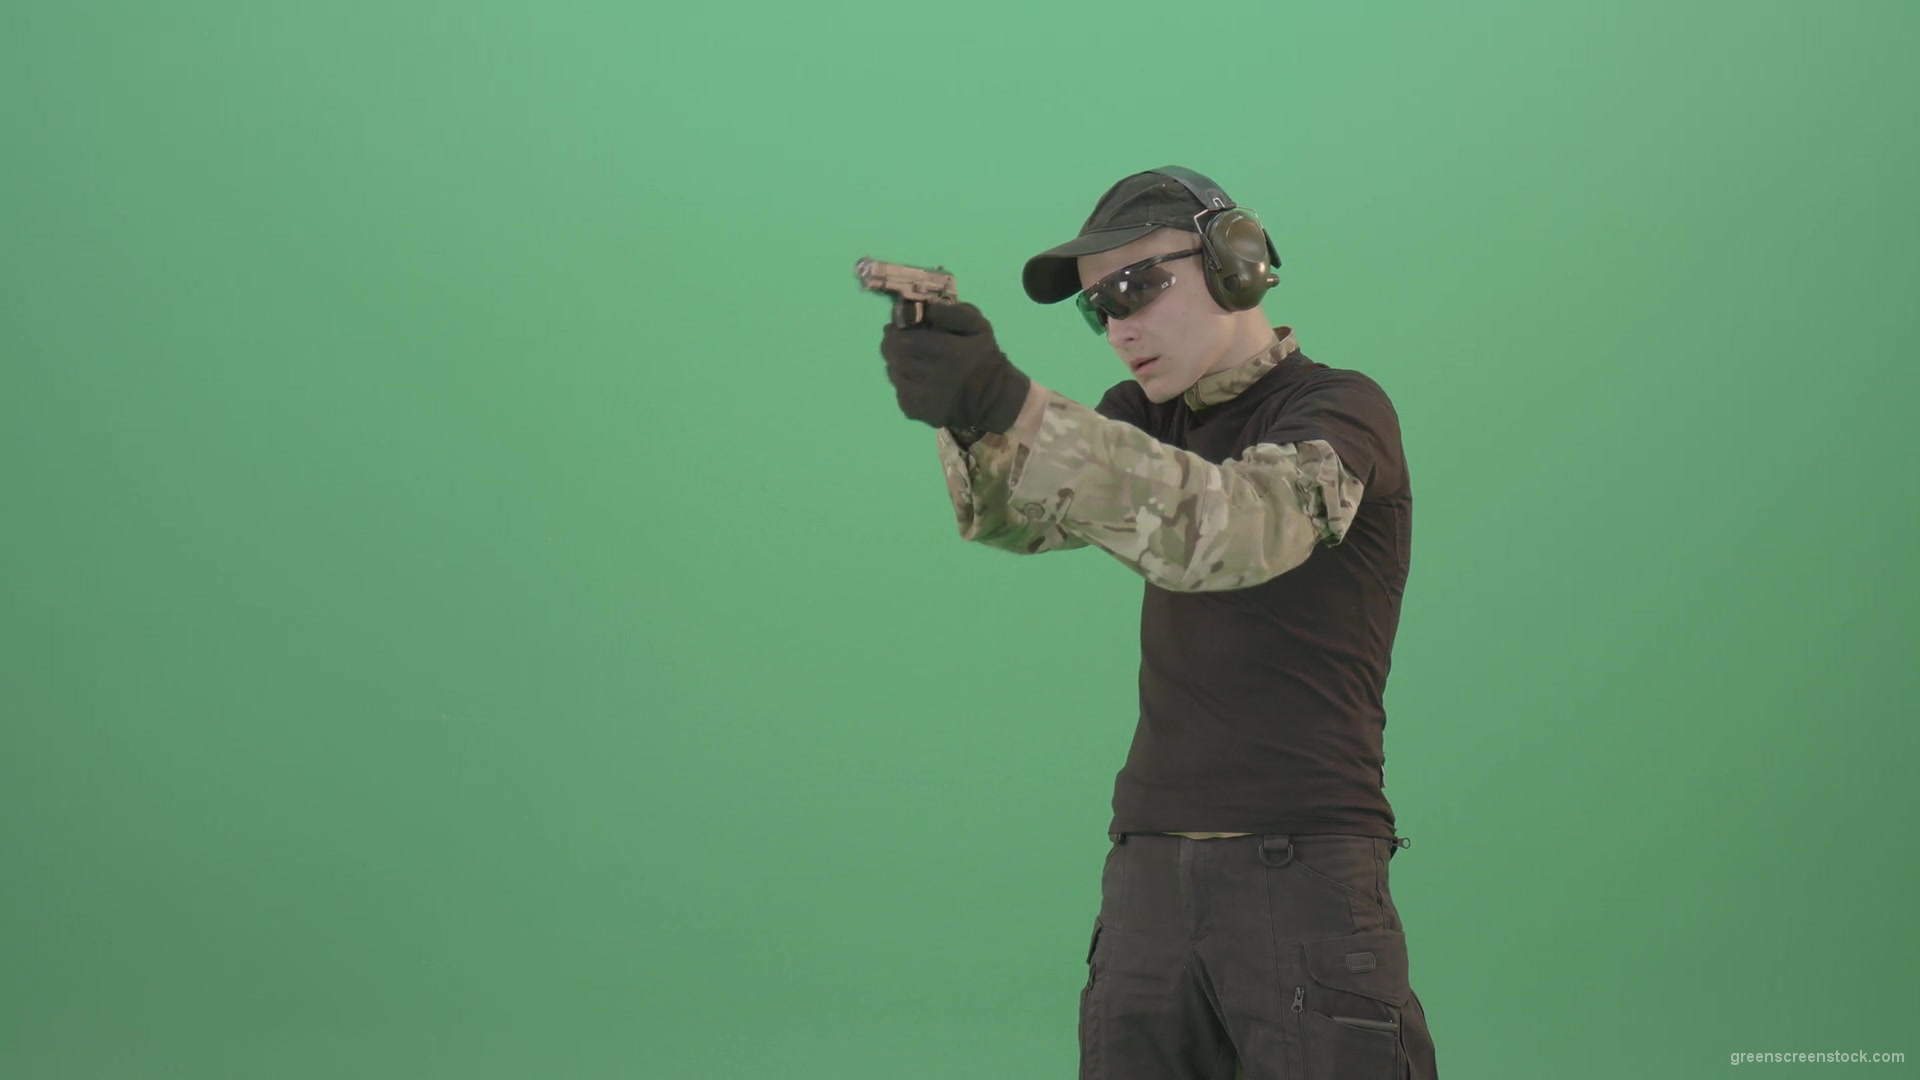 Young-boy-sodier-testin-small-pistol-gun-and-shooting-isolated-on-green-screen-4K-Video-Footage-1920_004 Green Screen Stock